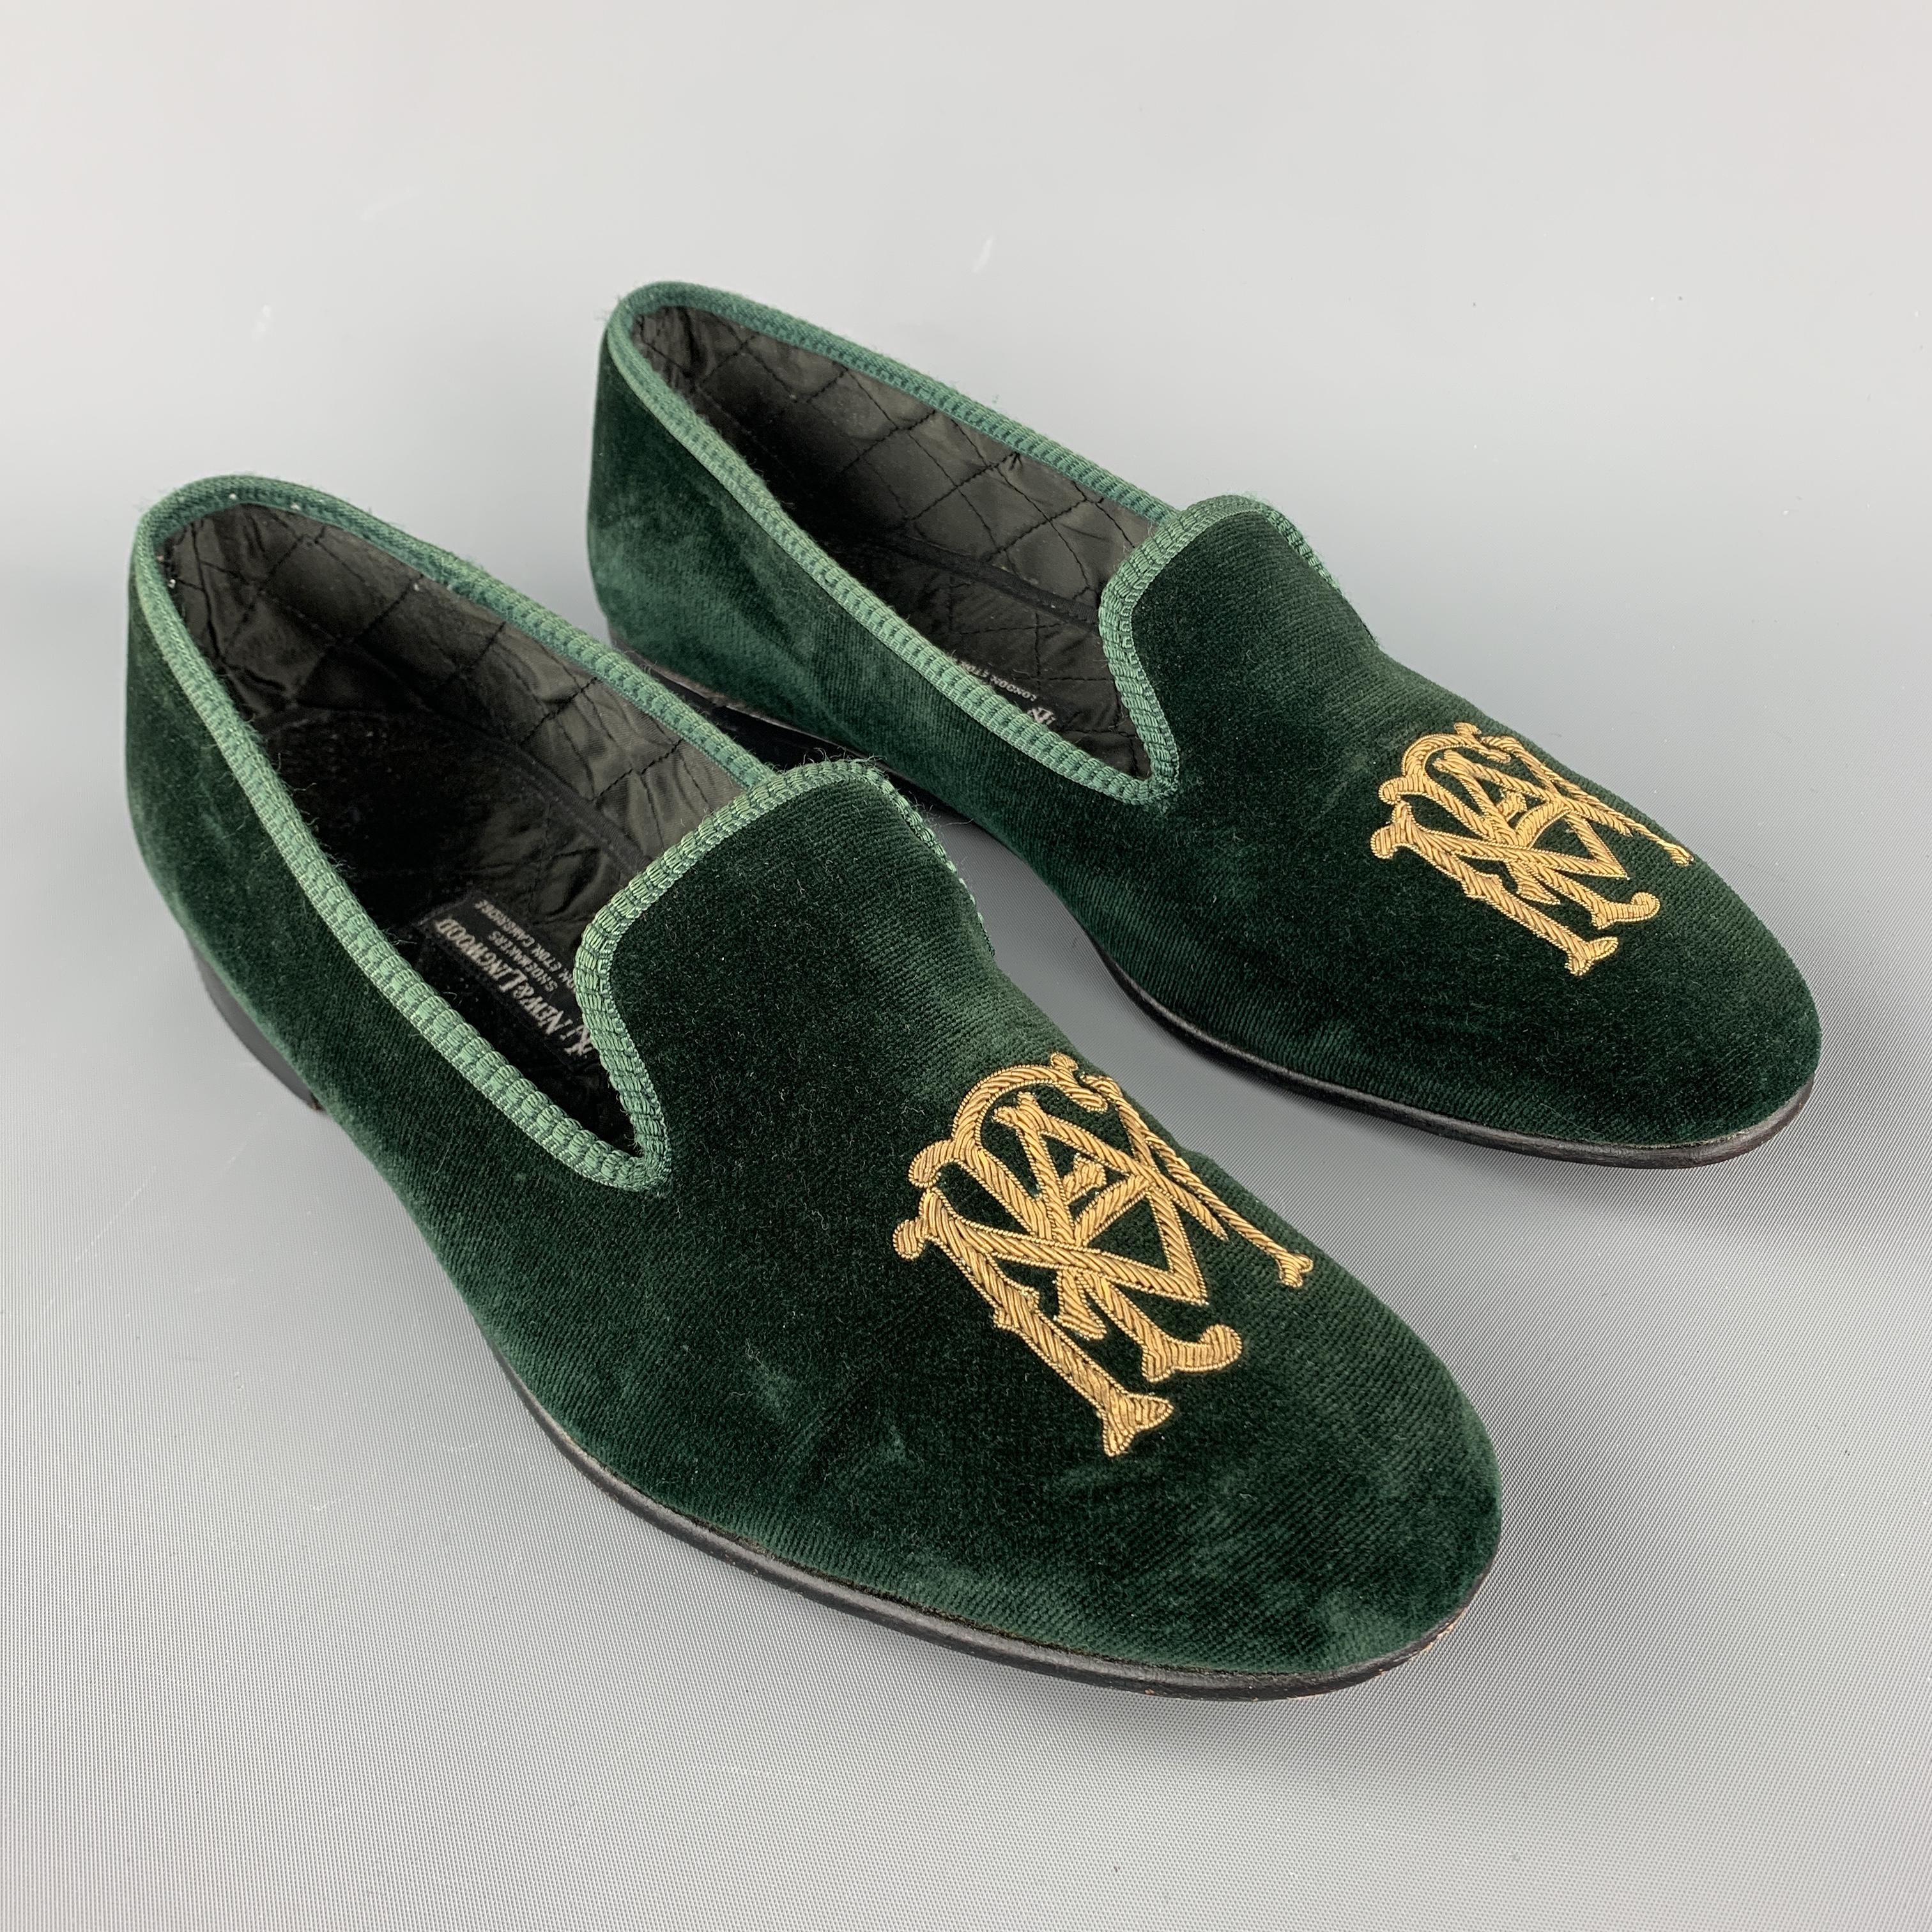 NEW & LINGWOOD Slippers Loafers comes in a solid green velvet material, with an embroidery at toe and a trim, with a quilted sateen interior and a leather ousole. Hand Made in England. 

Excellent Pre-Owned Condition.
Marked: 8D

Outsole: 11 x 3.7